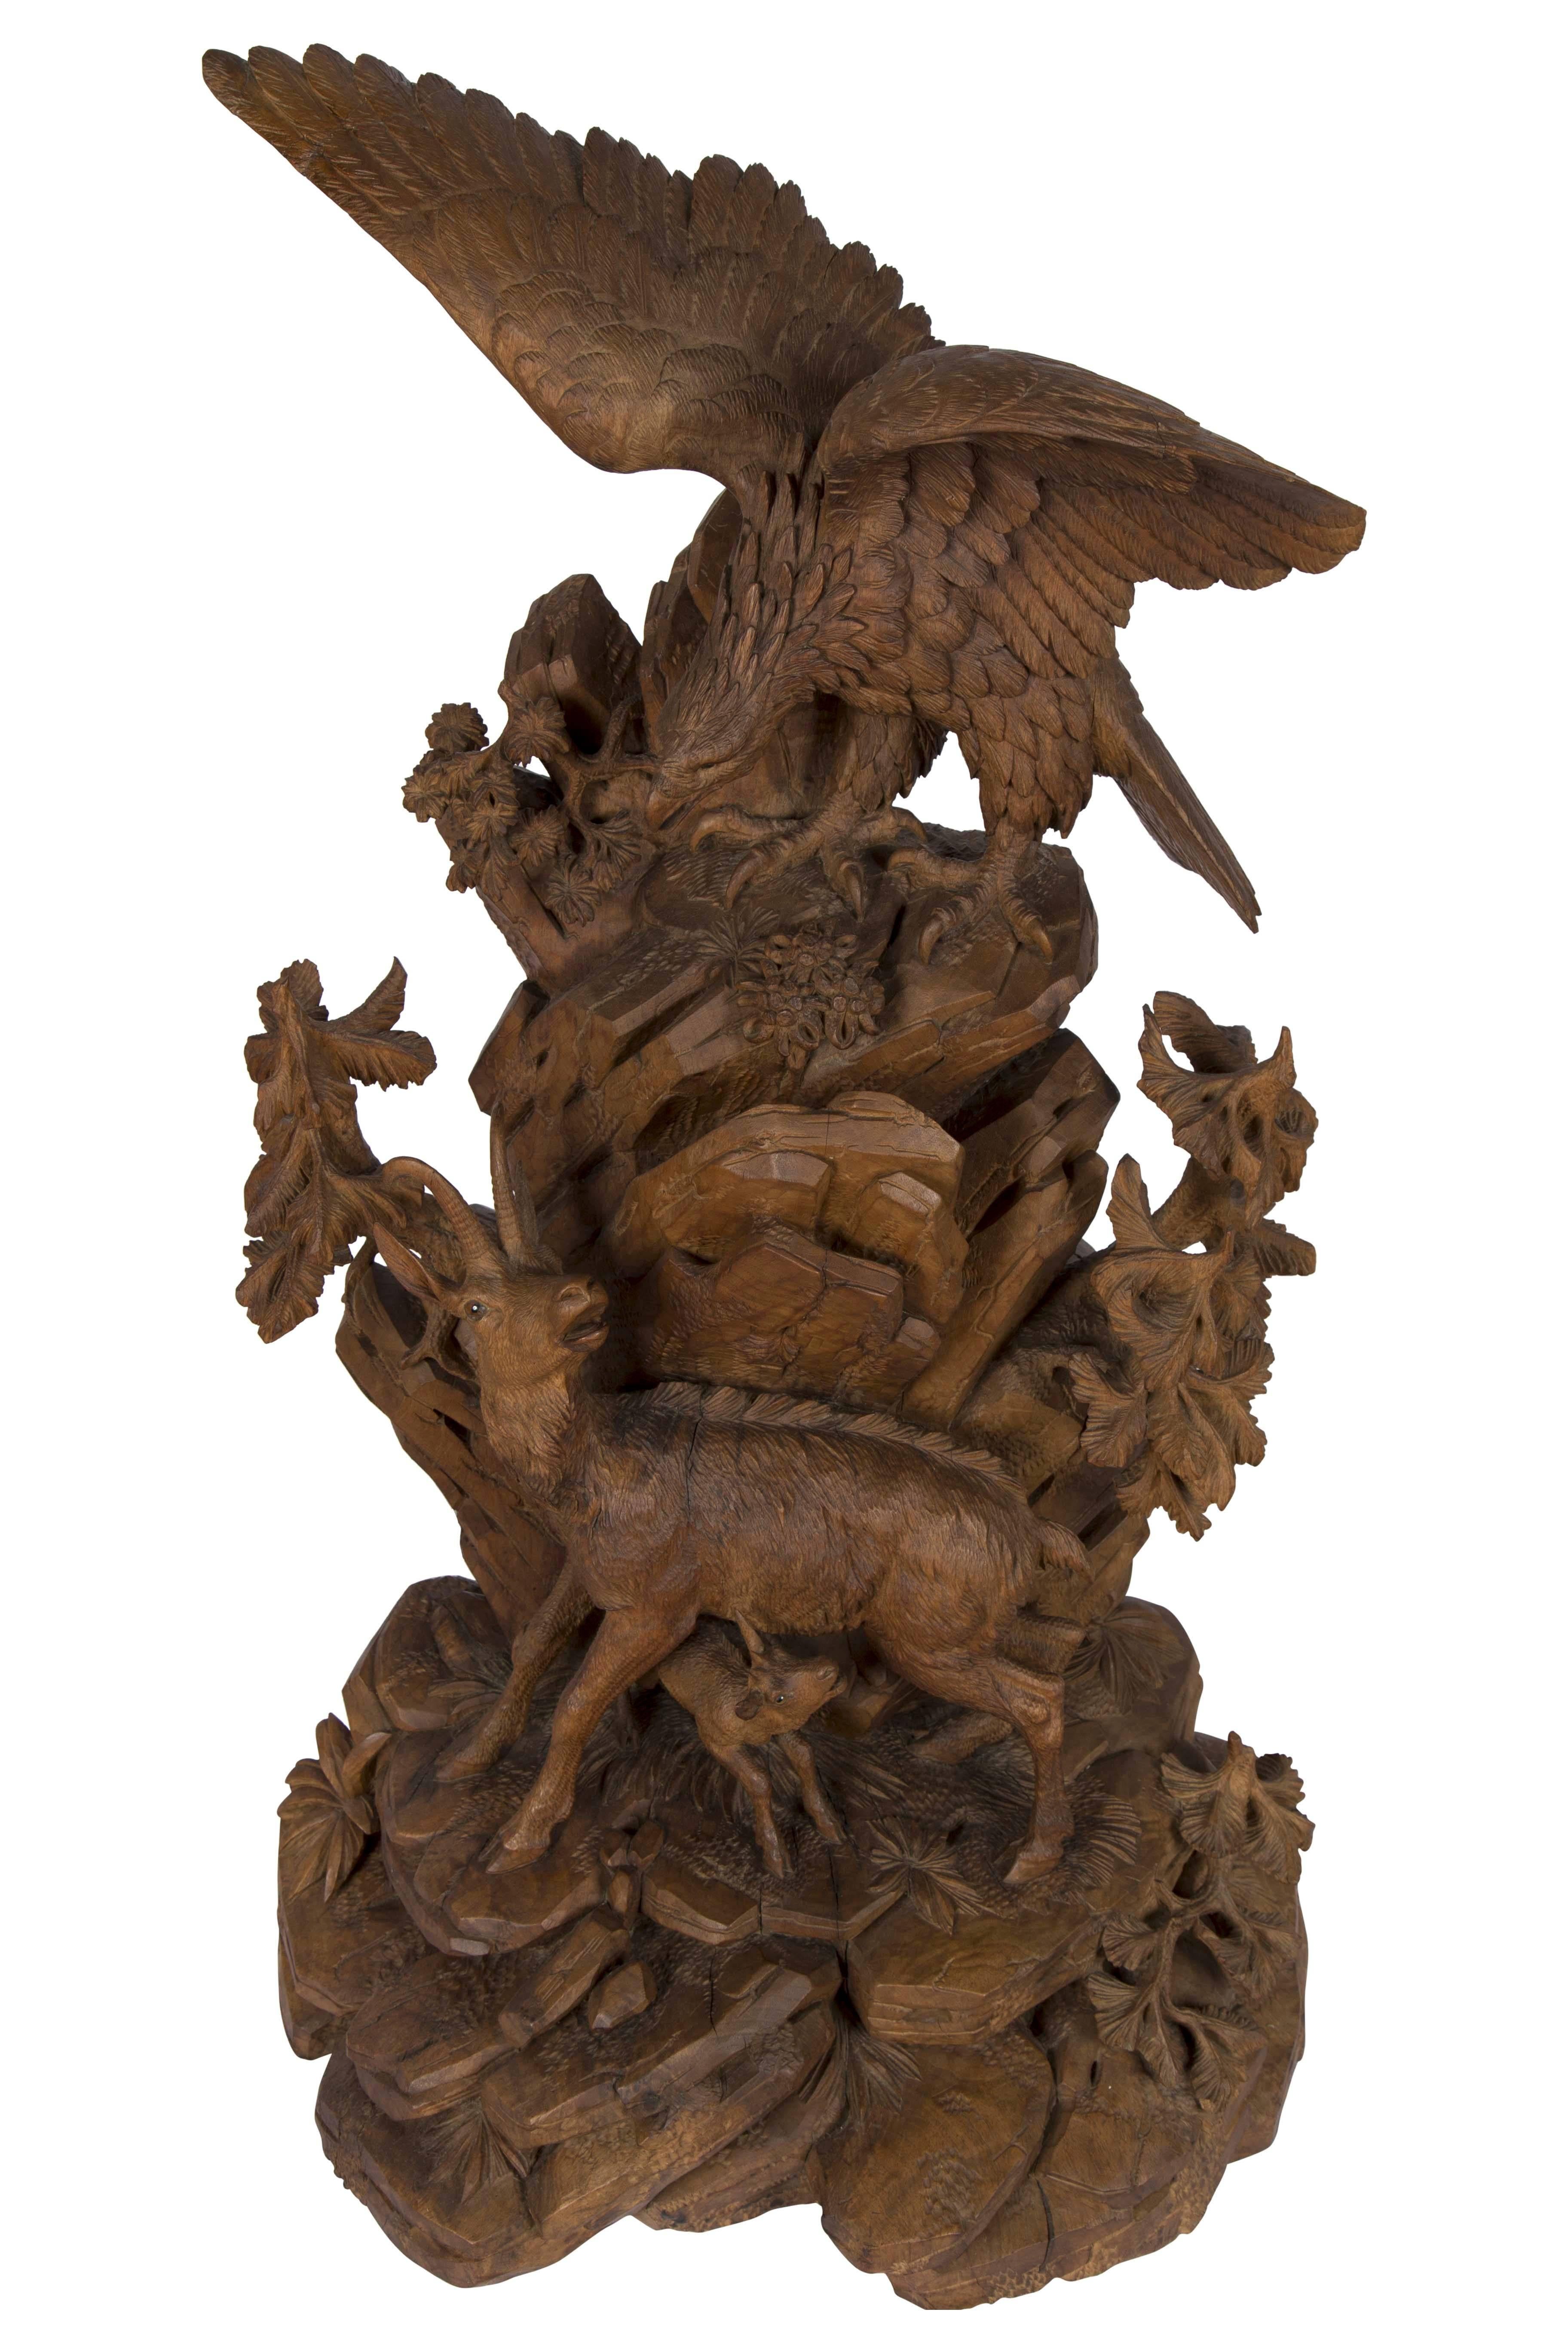 A finely carved Swiss “Black Forest” carved walnut sculpture, circa 1890. Portraying a Chamois protecting it’s young from a preying eagle. This exceptional carving is carved from one solid piece of walnut. Each of the animals has it’s original glass